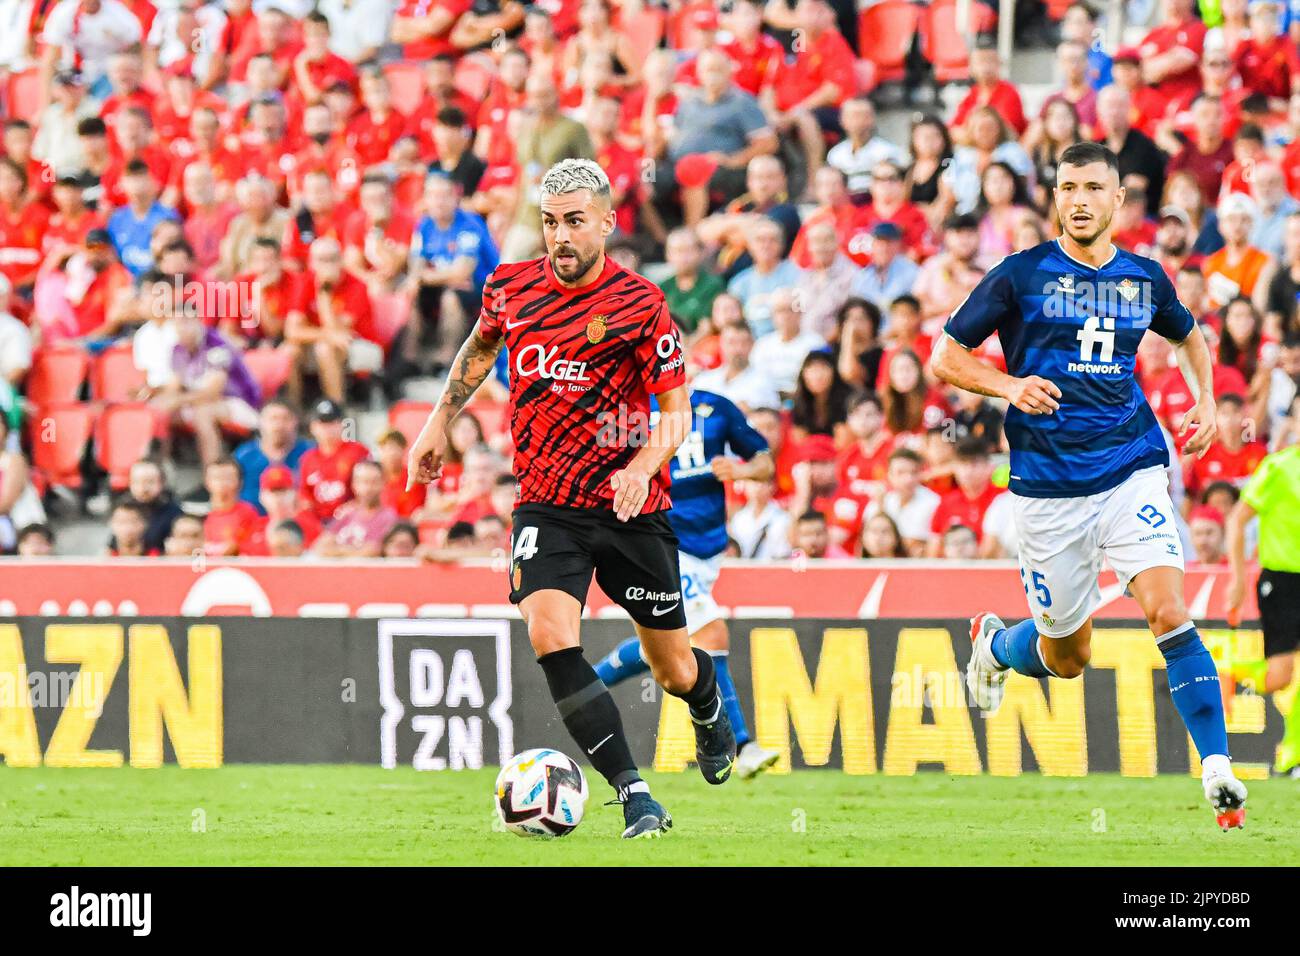 MALLORCA, SPAIN - AUGUST 20: Dani Rodriguez  of RCD Mallorca in the match between RCD Mallorca and Real Betis of La Liga Santander on August 20, 2022 at Visit Mallorca Stadium Son Moix in Mallorca, Spain. (Photo by Samuel Carreño/PxImages) Stock Photo